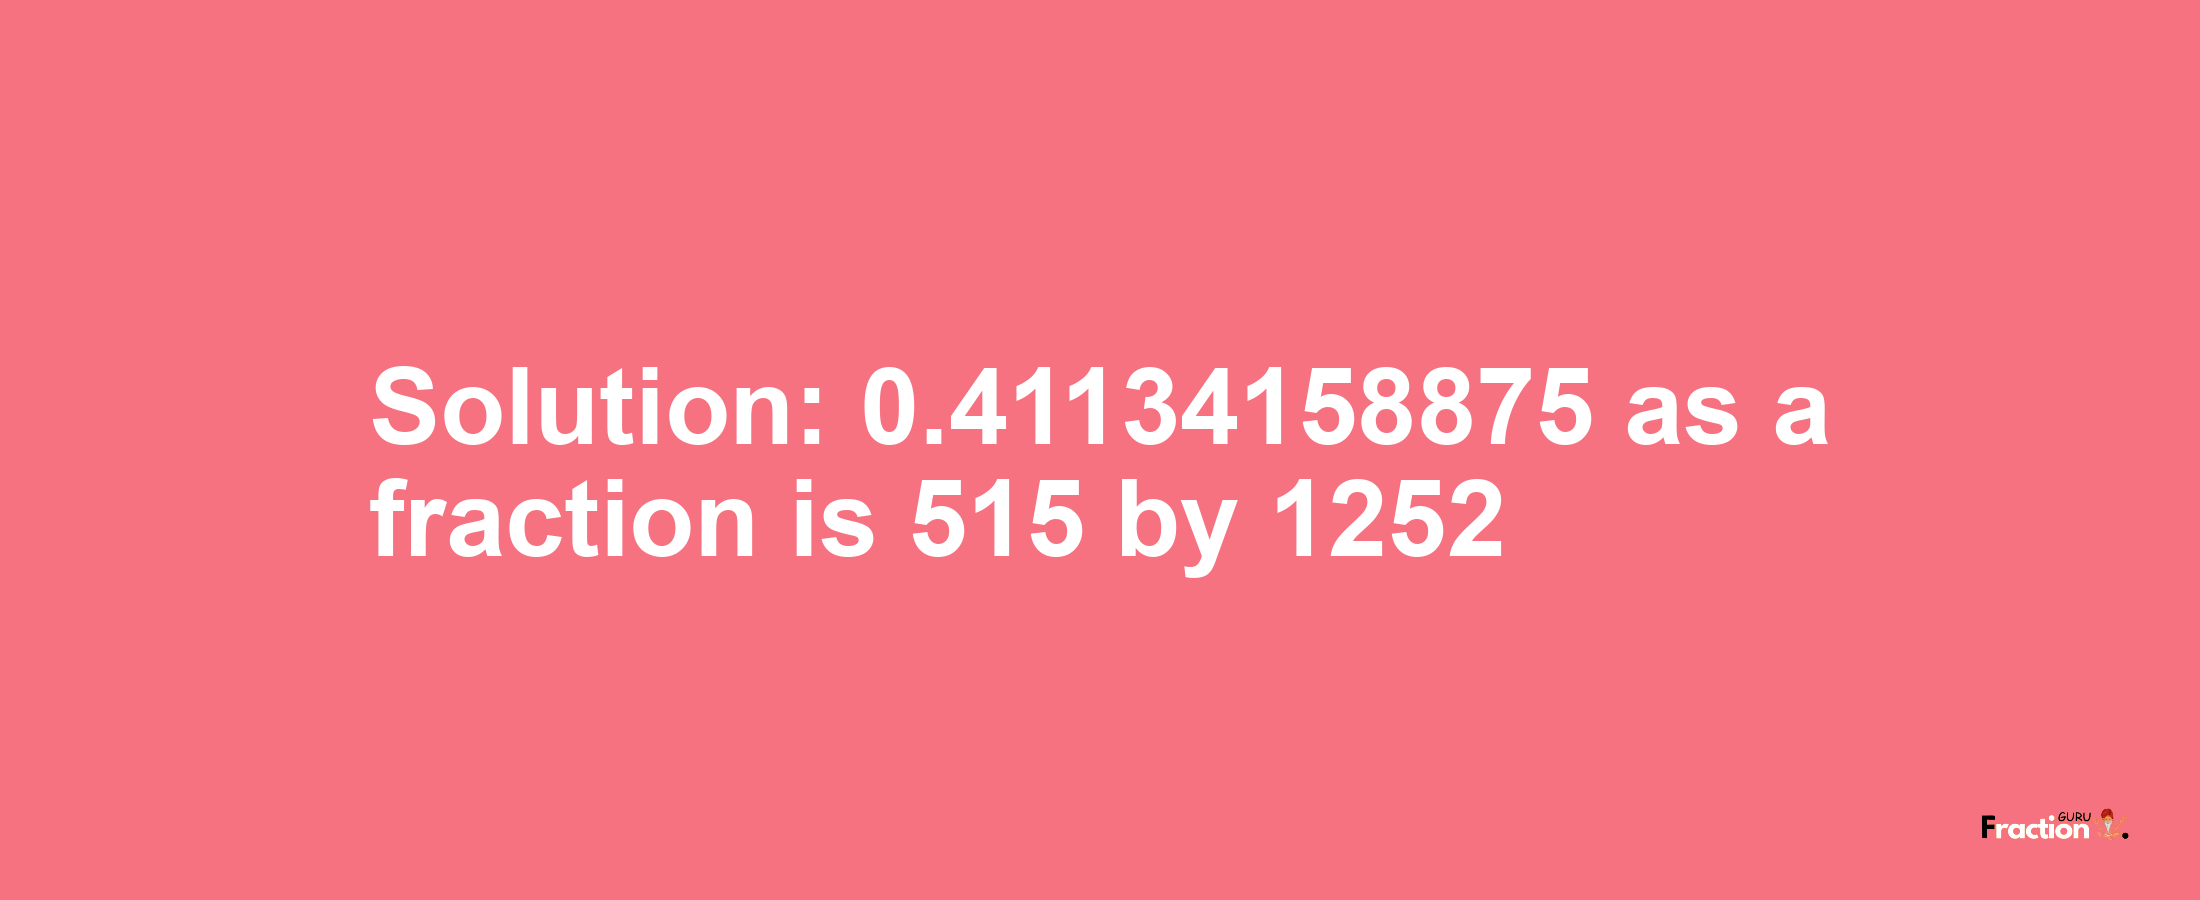 Solution:0.41134158875 as a fraction is 515/1252